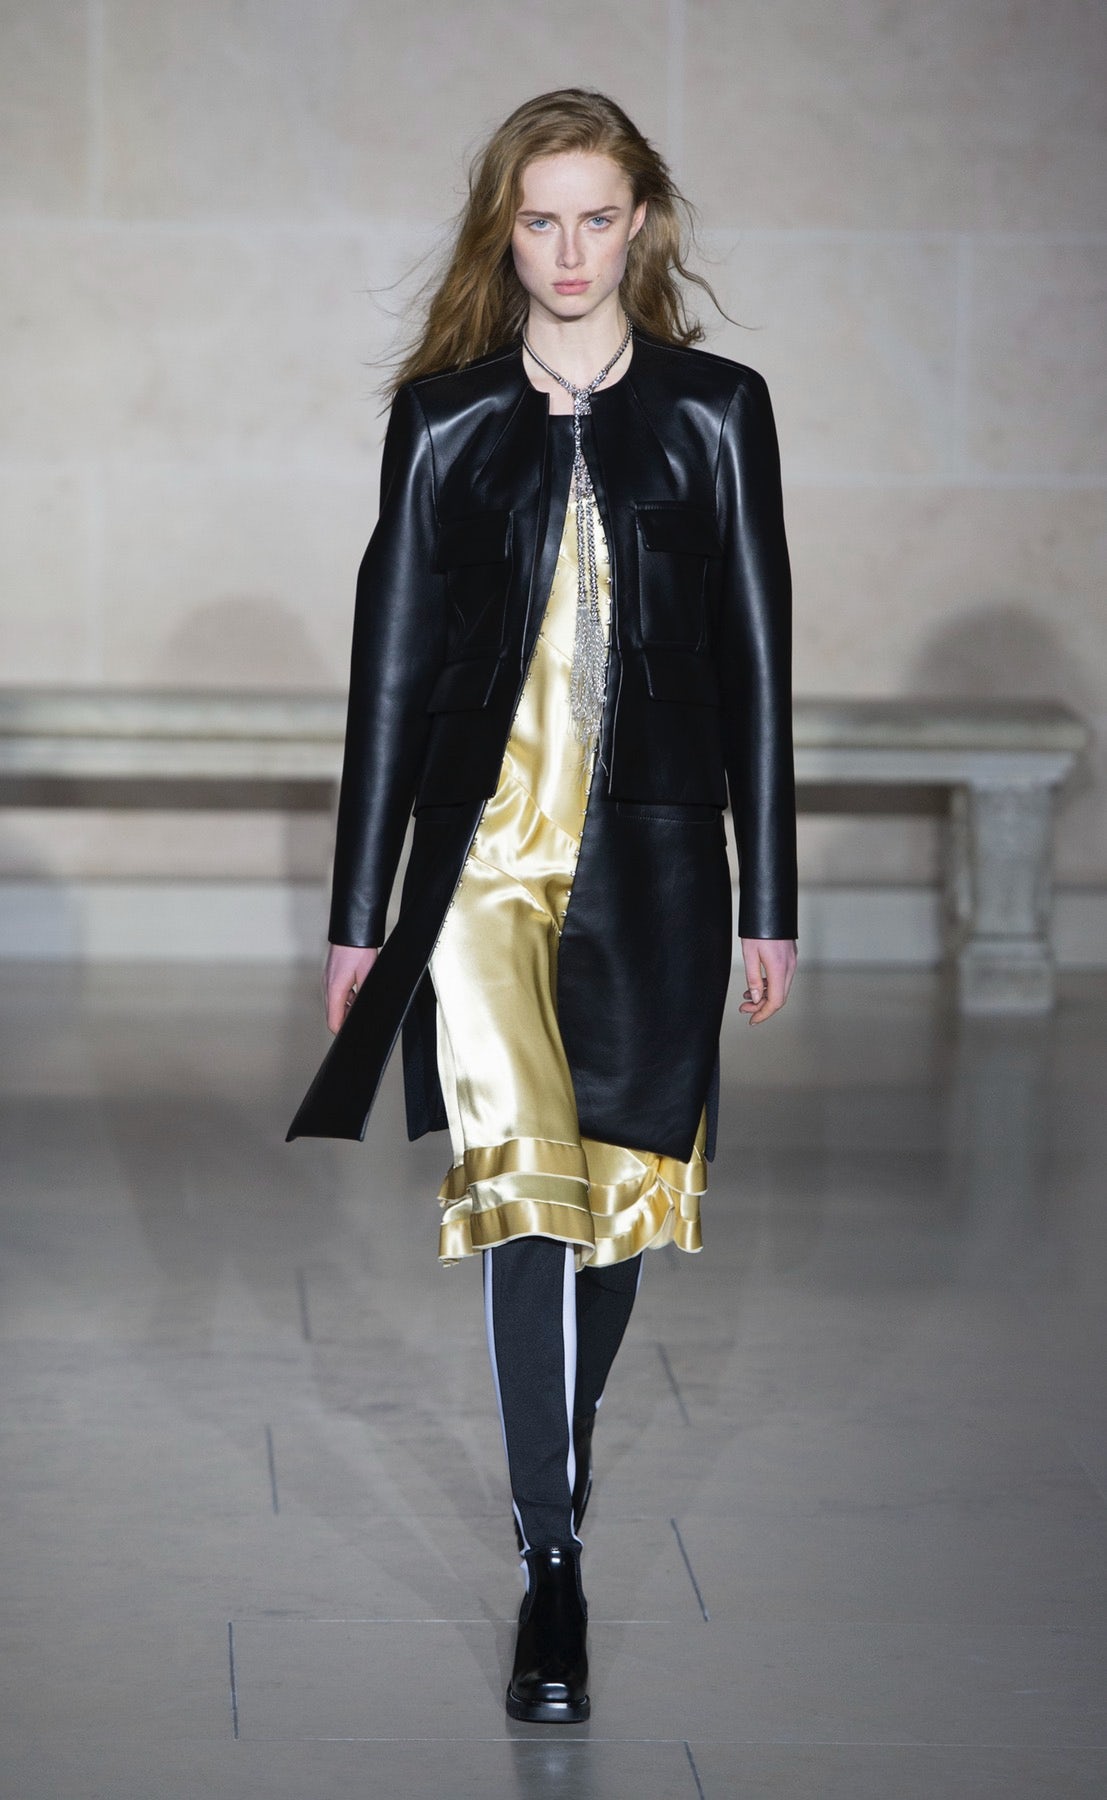 Blended at Vuitton | BoF